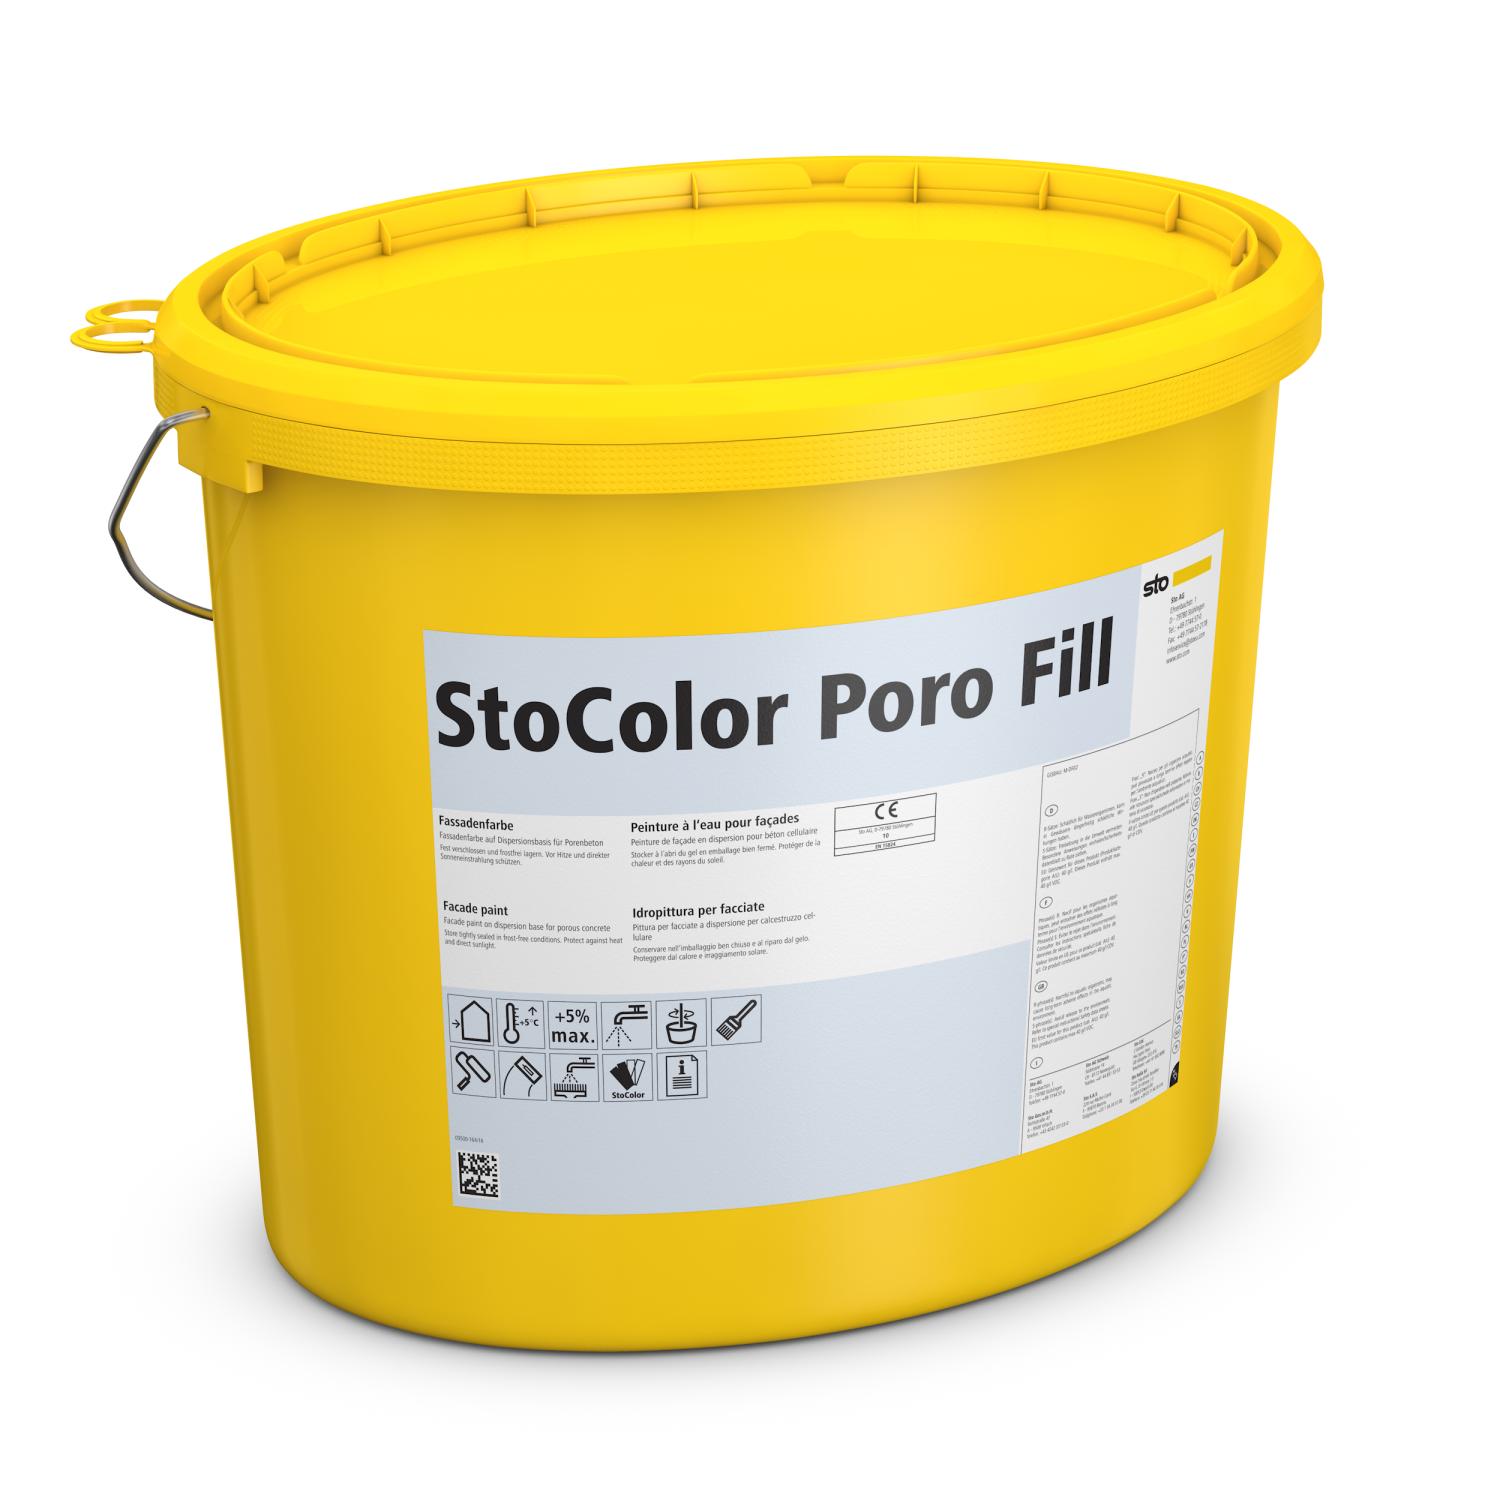 StoColor Poro Fill weiß - 25 kg Eimer